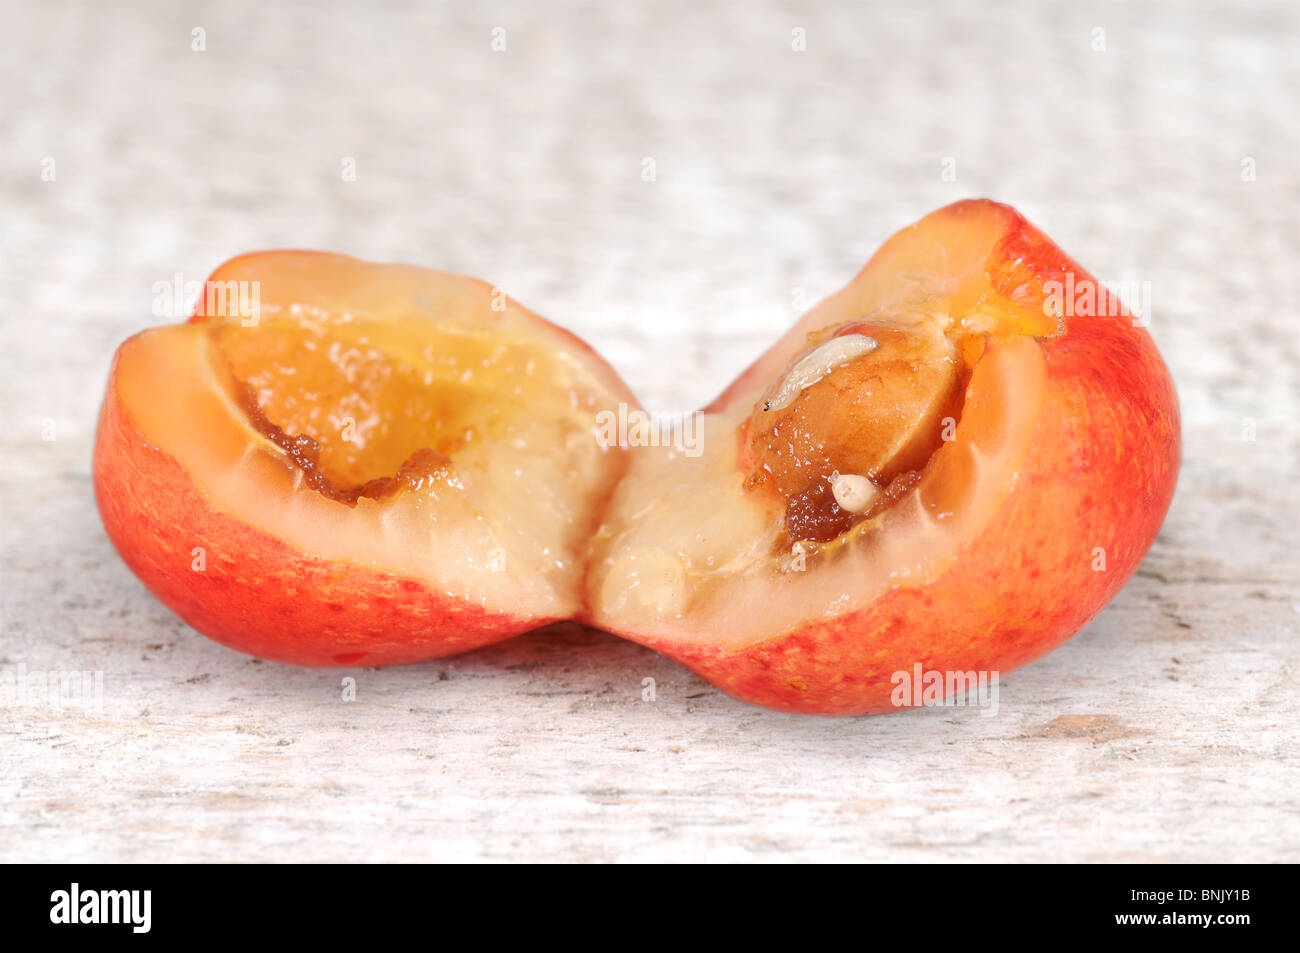 Worms in an open red cherry on wooden board. Stock Photo